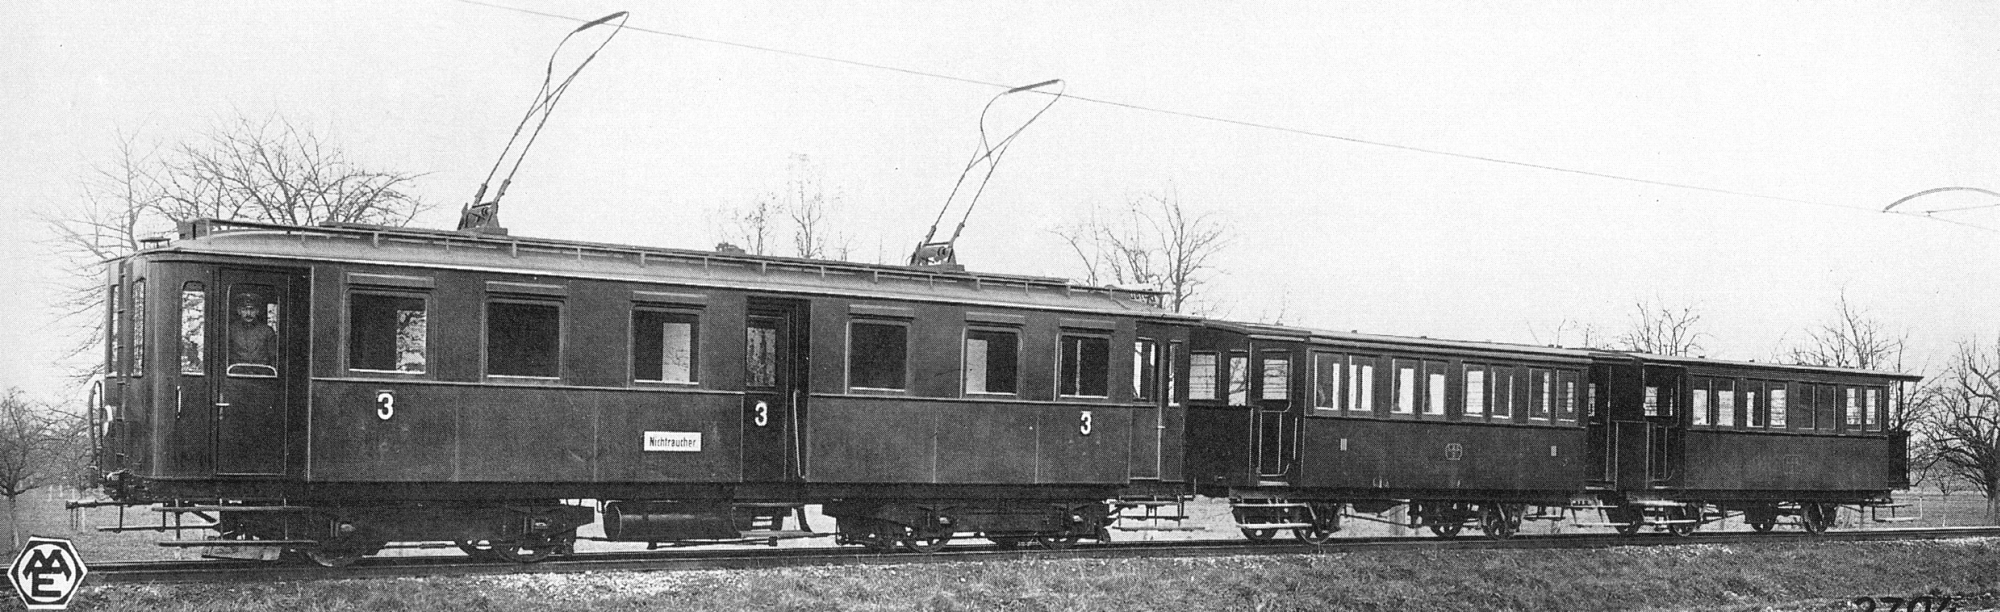 A vehicle in the original version with Lyra pantographs